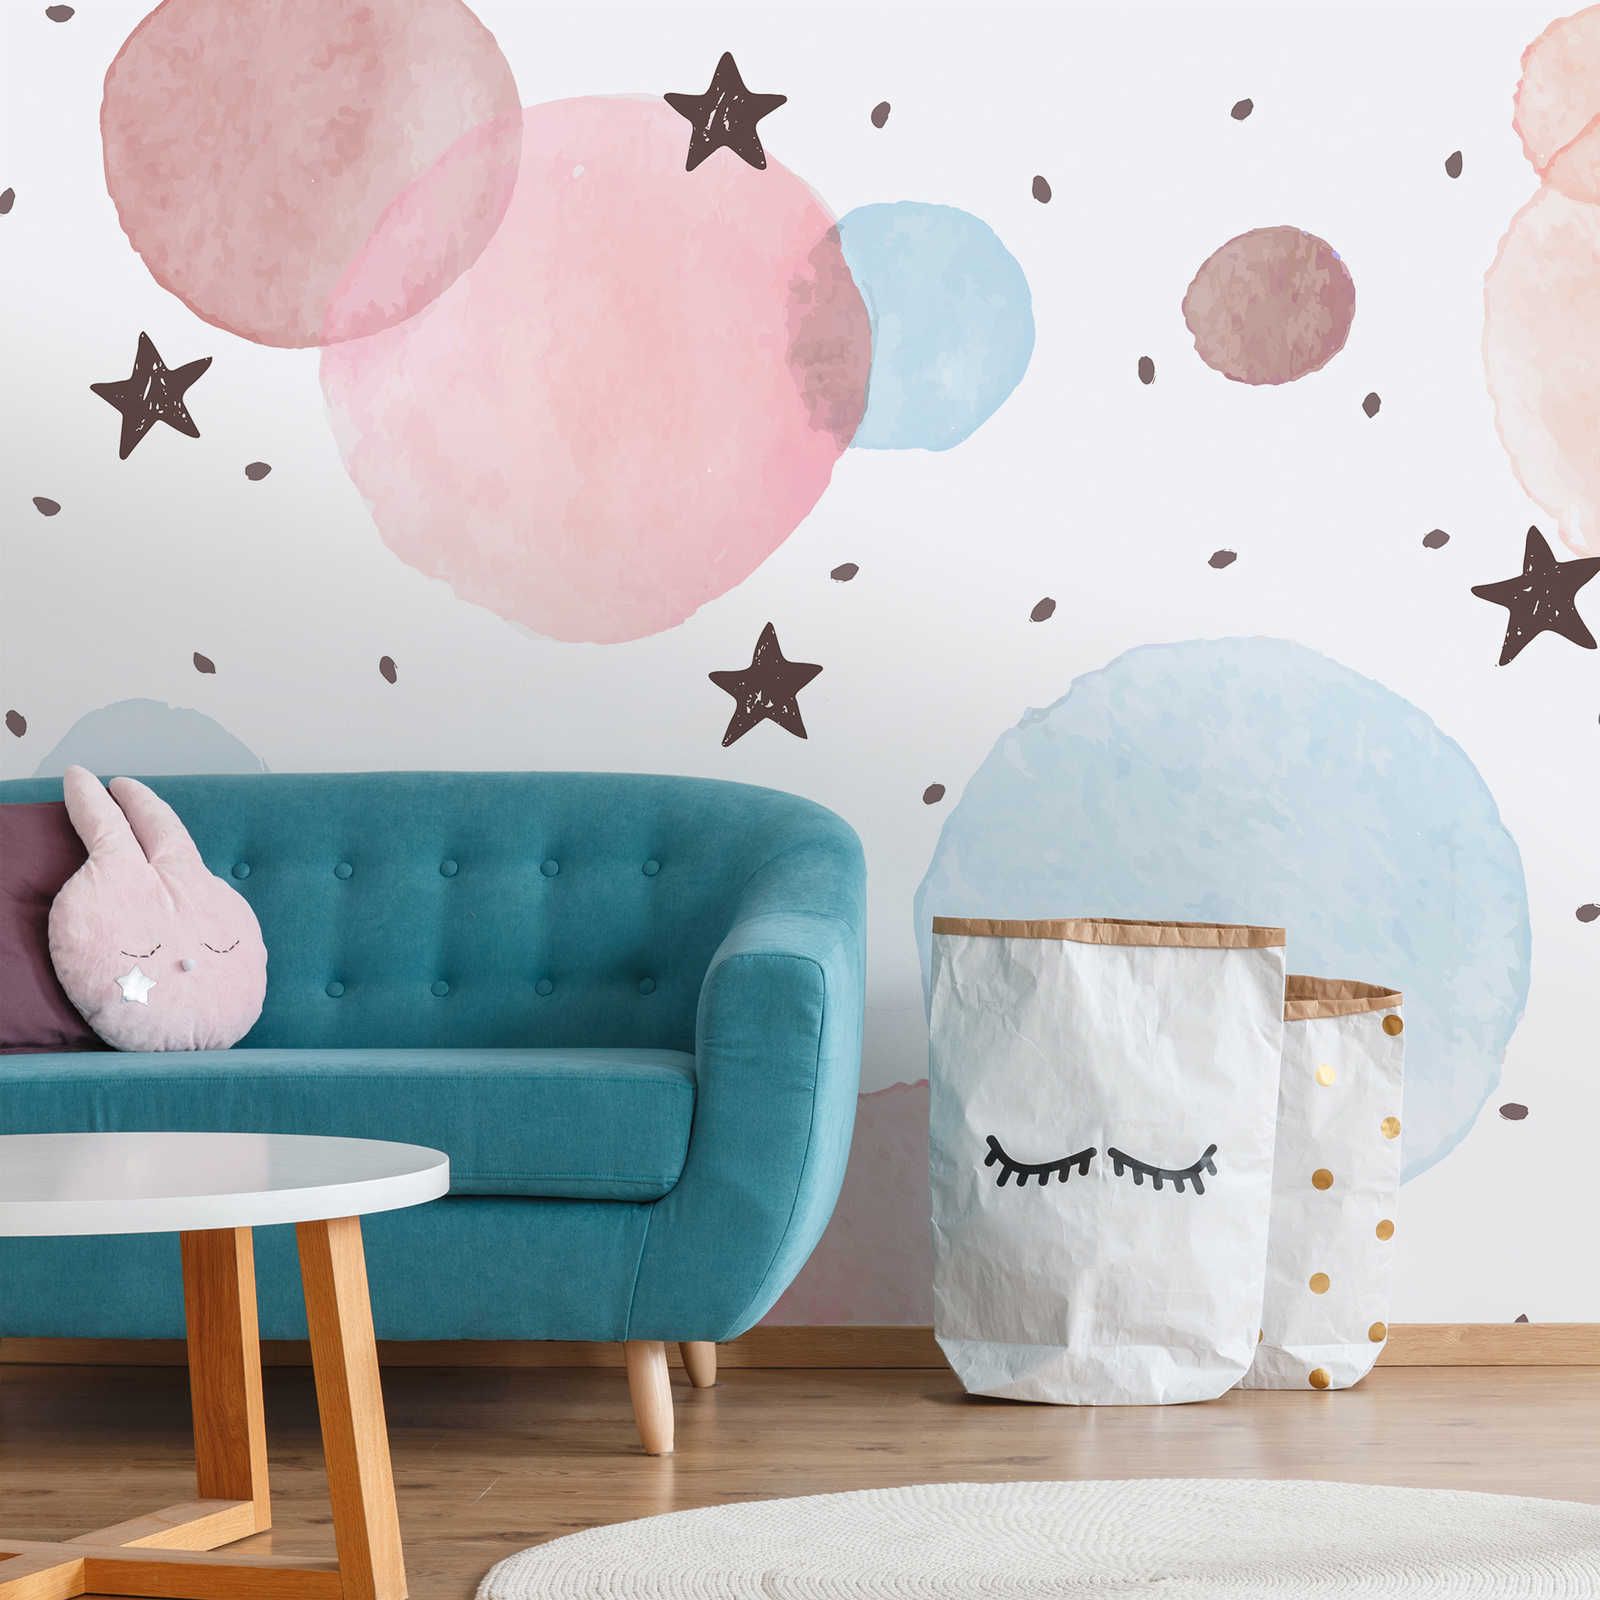 Nursery mural with stars, dots and circles - Textured non-woven
